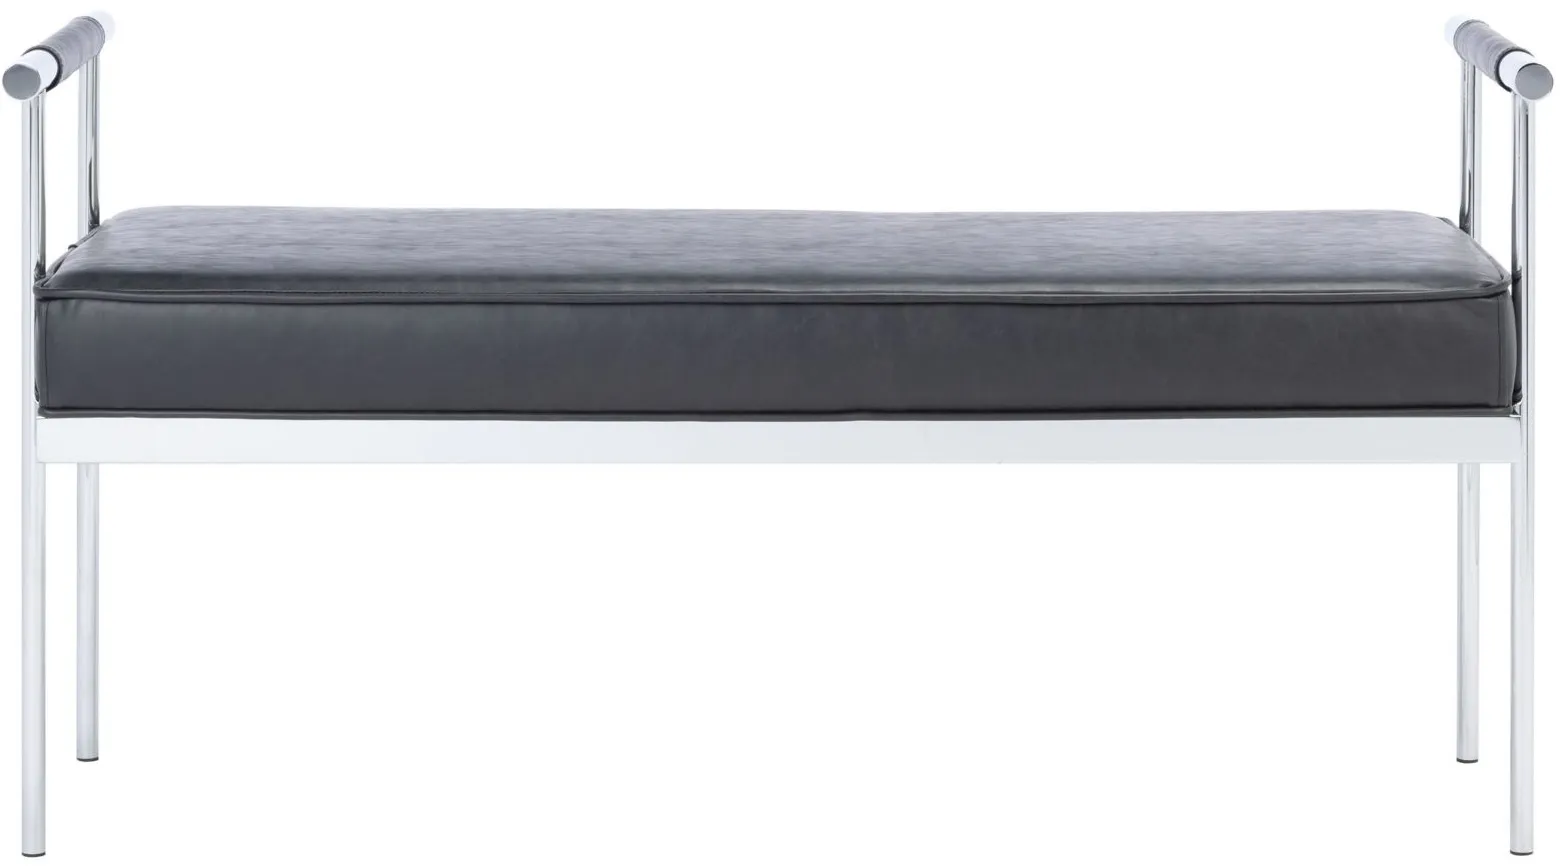 Pim Long Rectangle Bench with Arms in Black / Chrome by Safavieh